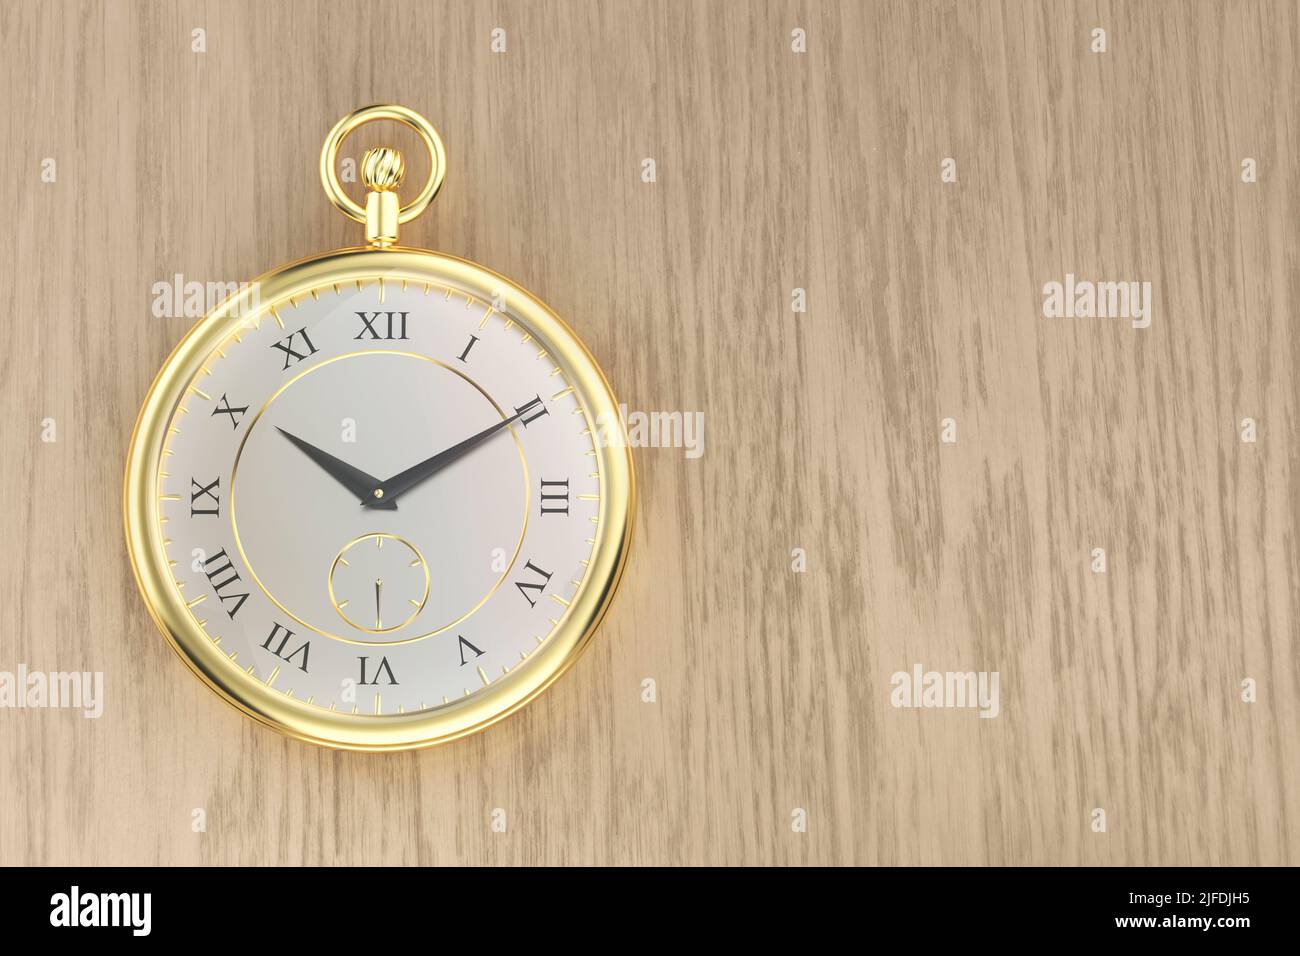 Shiny golden pocket watch on the wooden table, top view Stock Photo